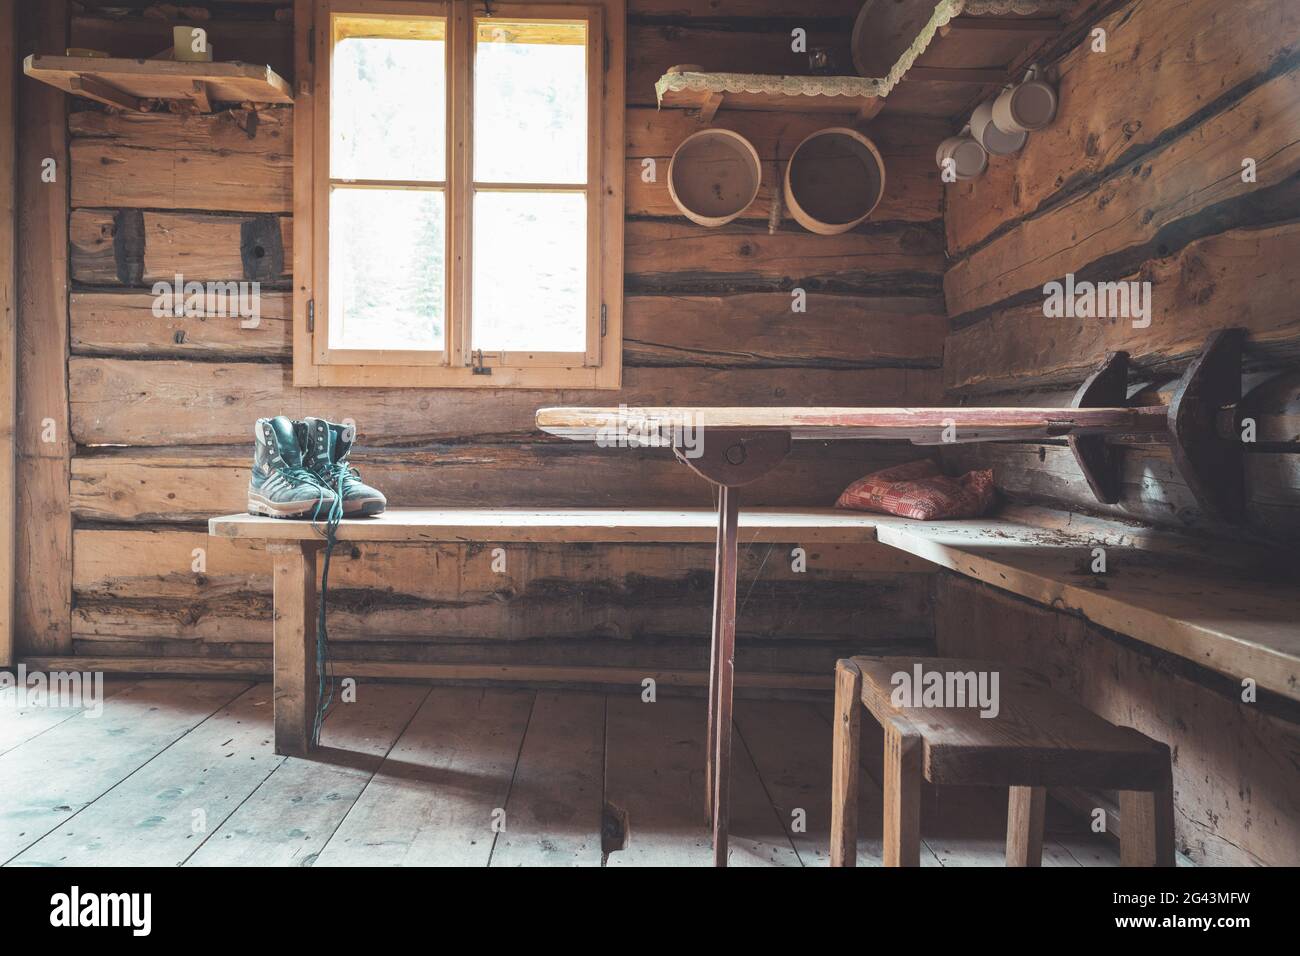 Abandoned mountain hut or chalet in Austria: rustic wooden interior Stock Photo